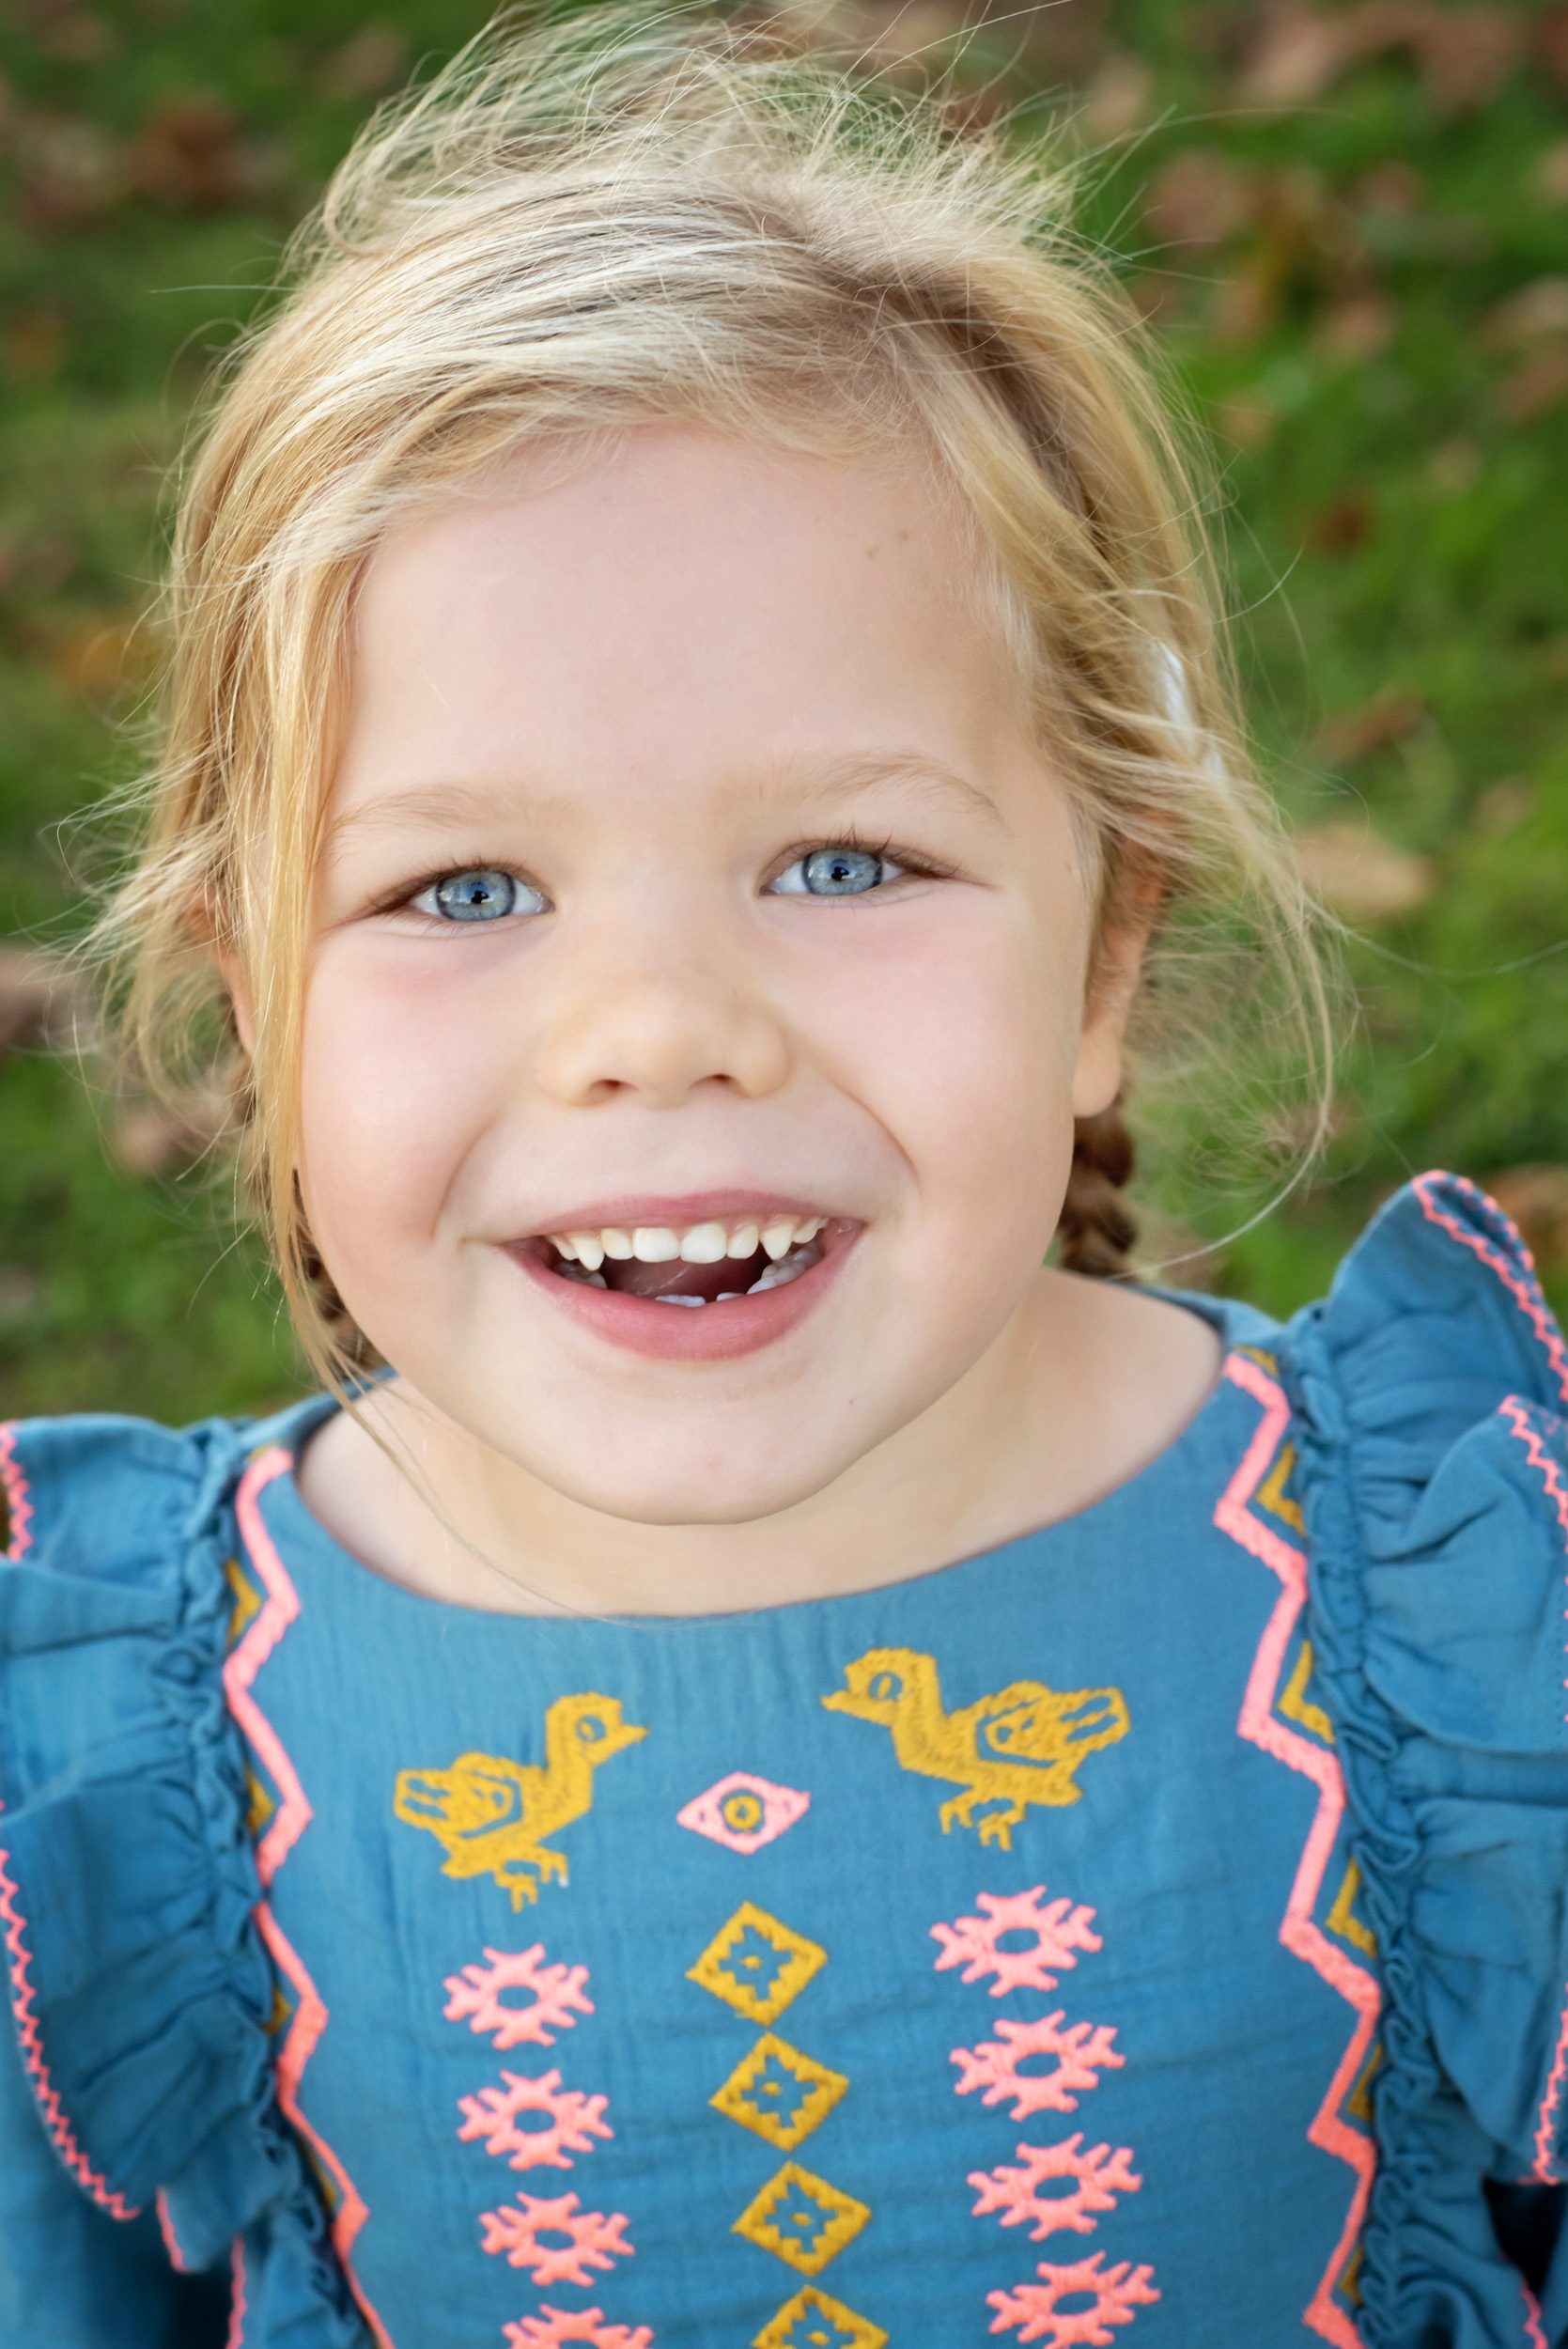 Close up of a young girl looking up at the camera and smiling during a family photoshoot